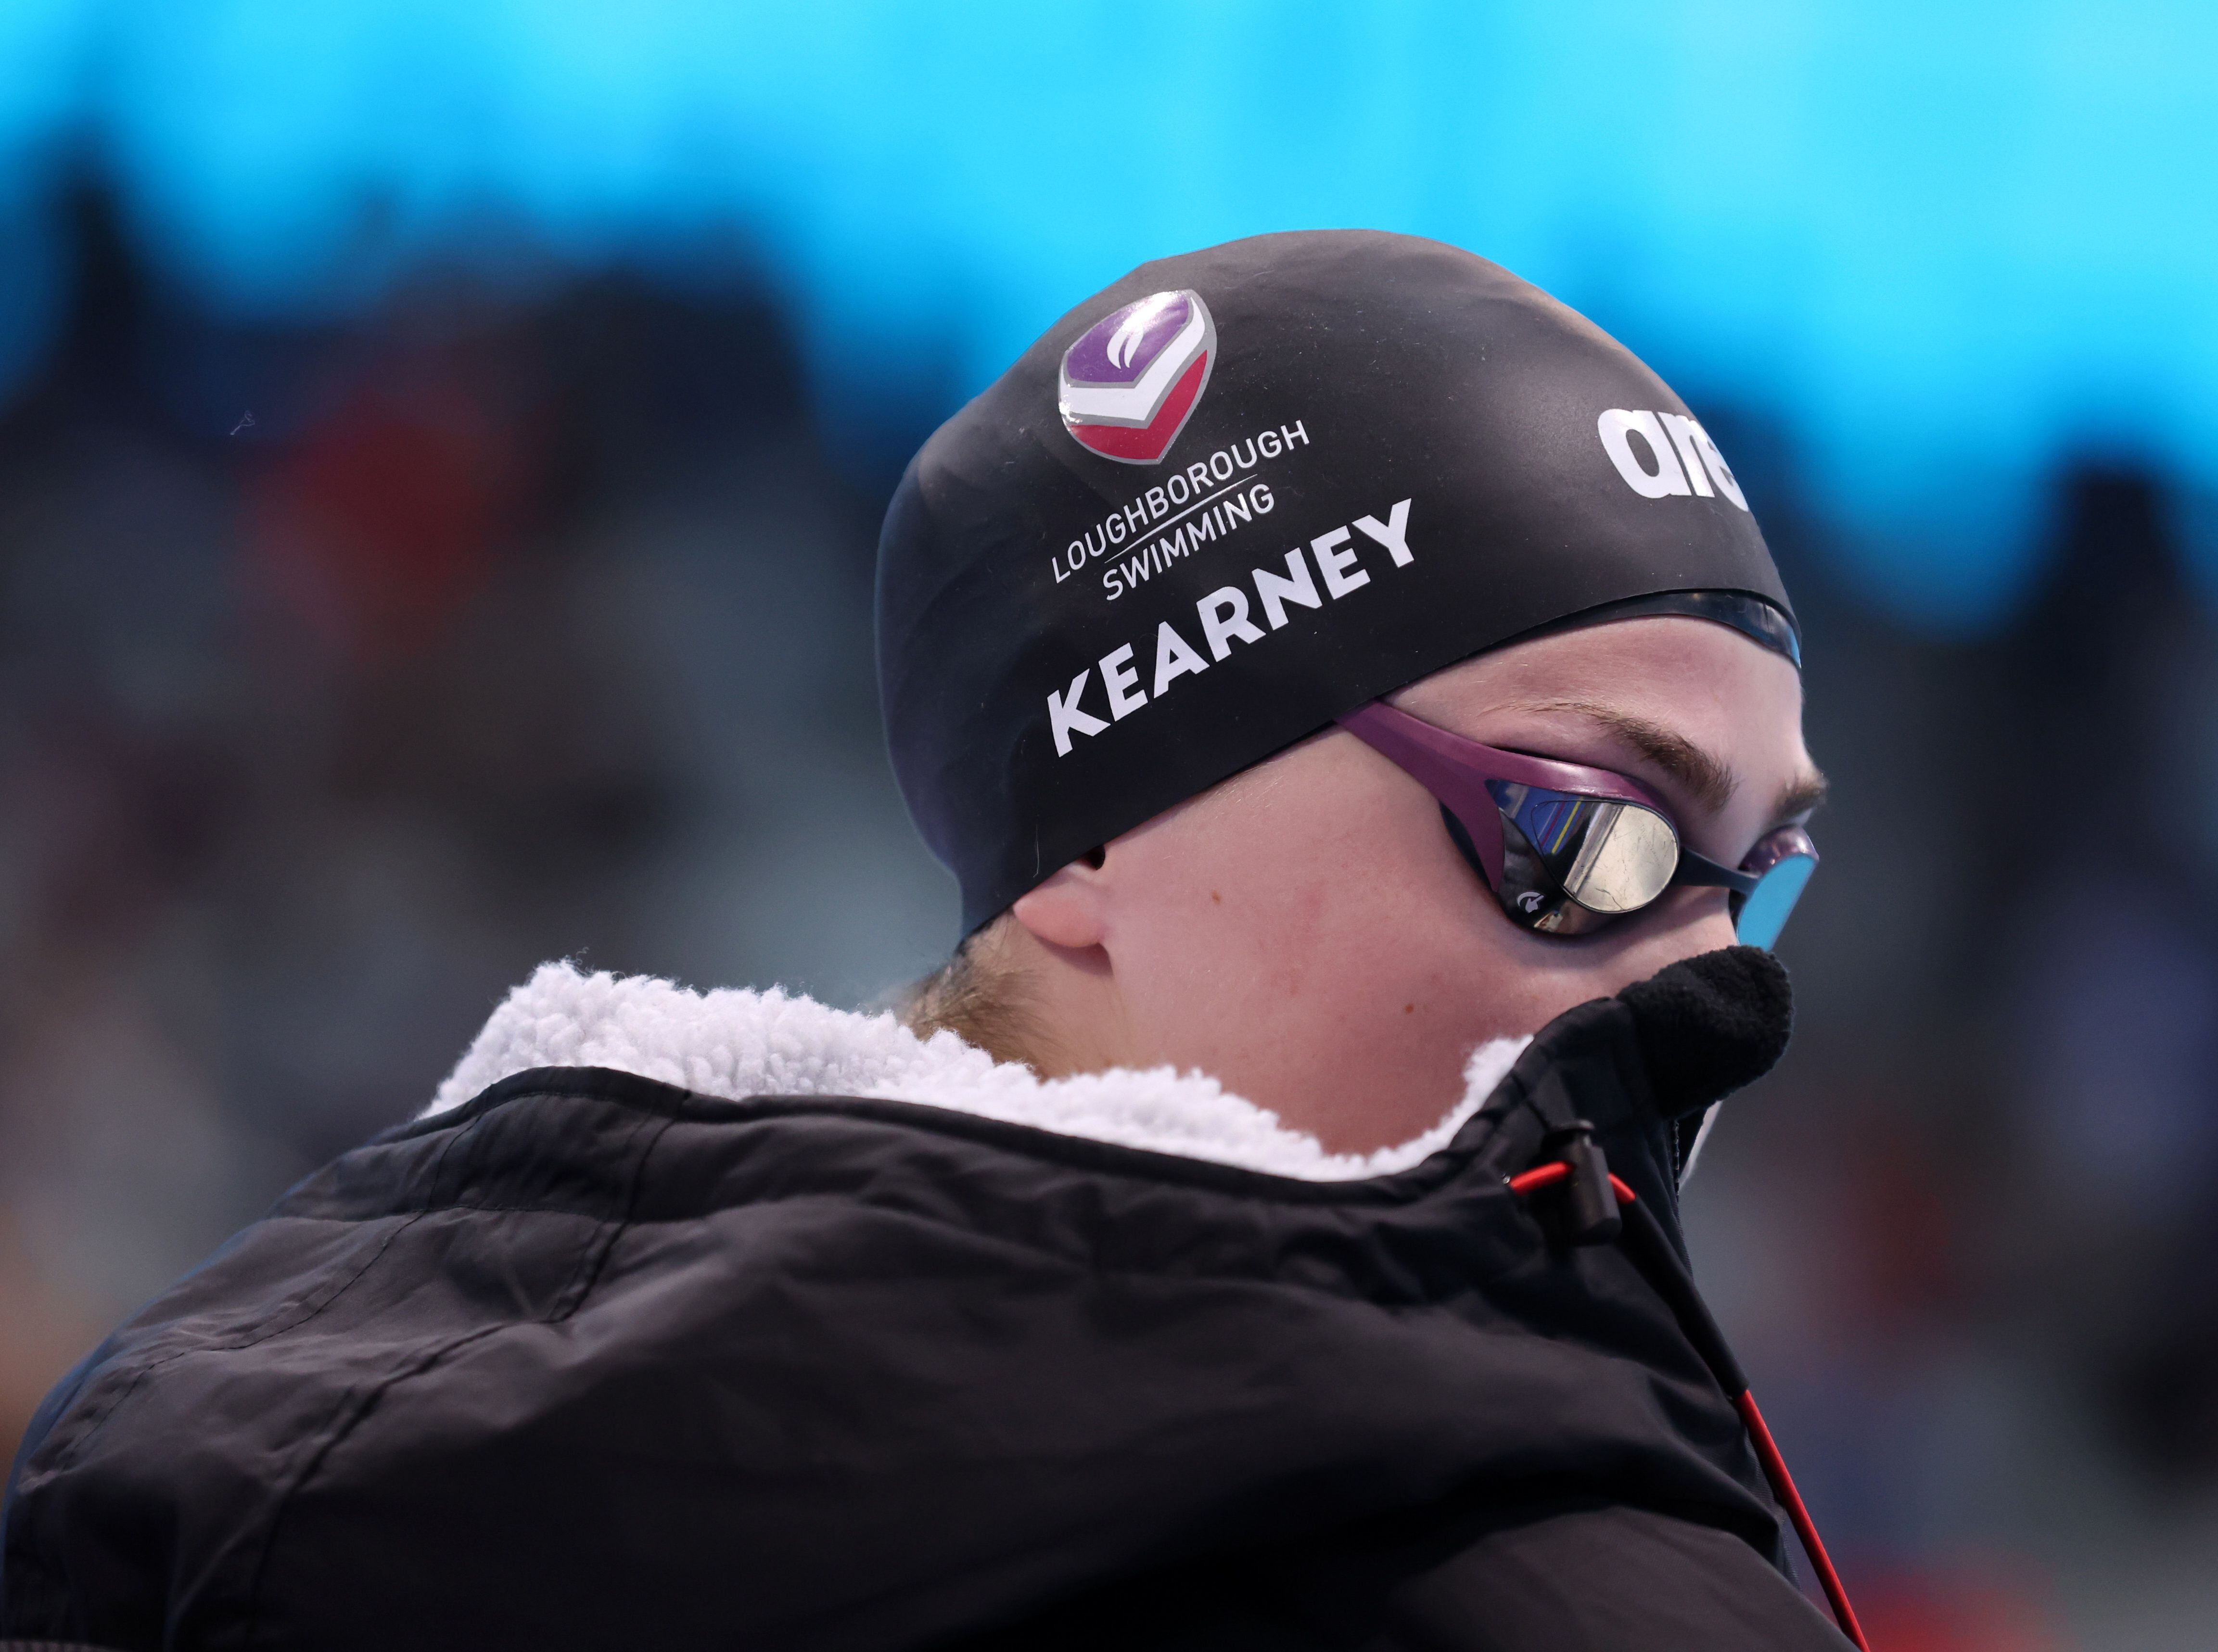 Aldridge swimmer Tully Kearney selected for Team GB Paralympics squad